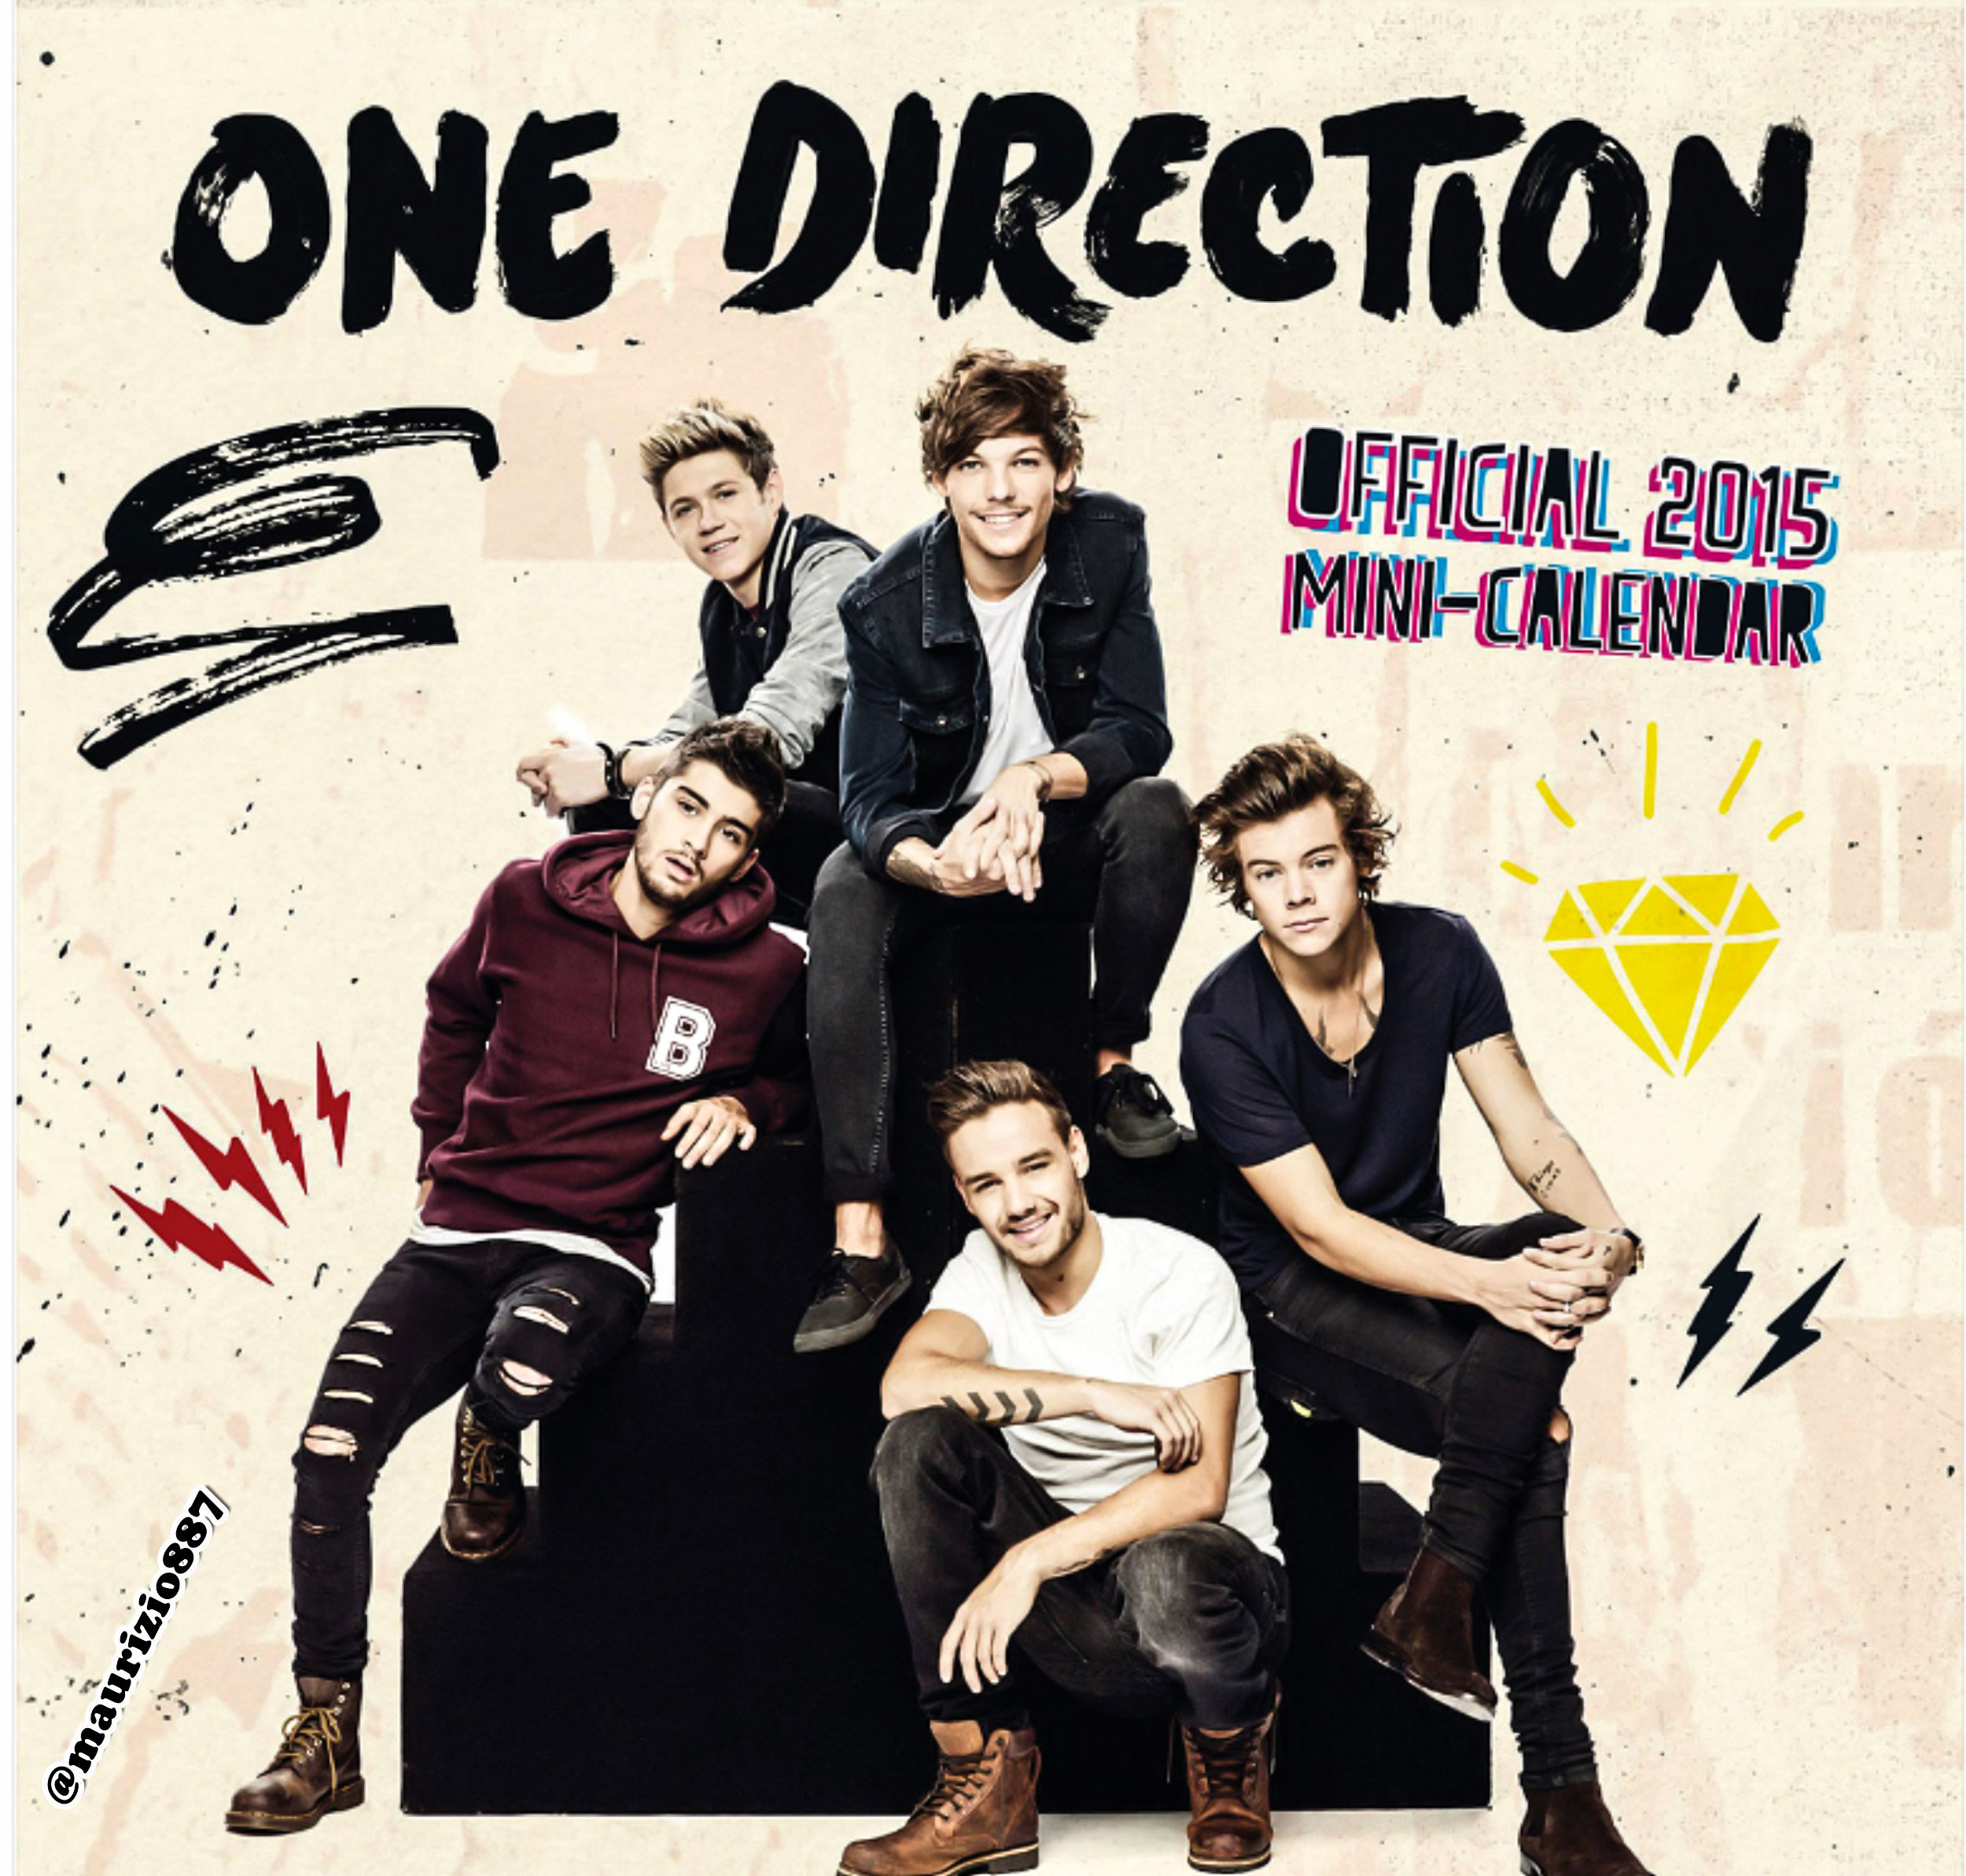 One Direction images one direction calendar 2015 wallpaper photos